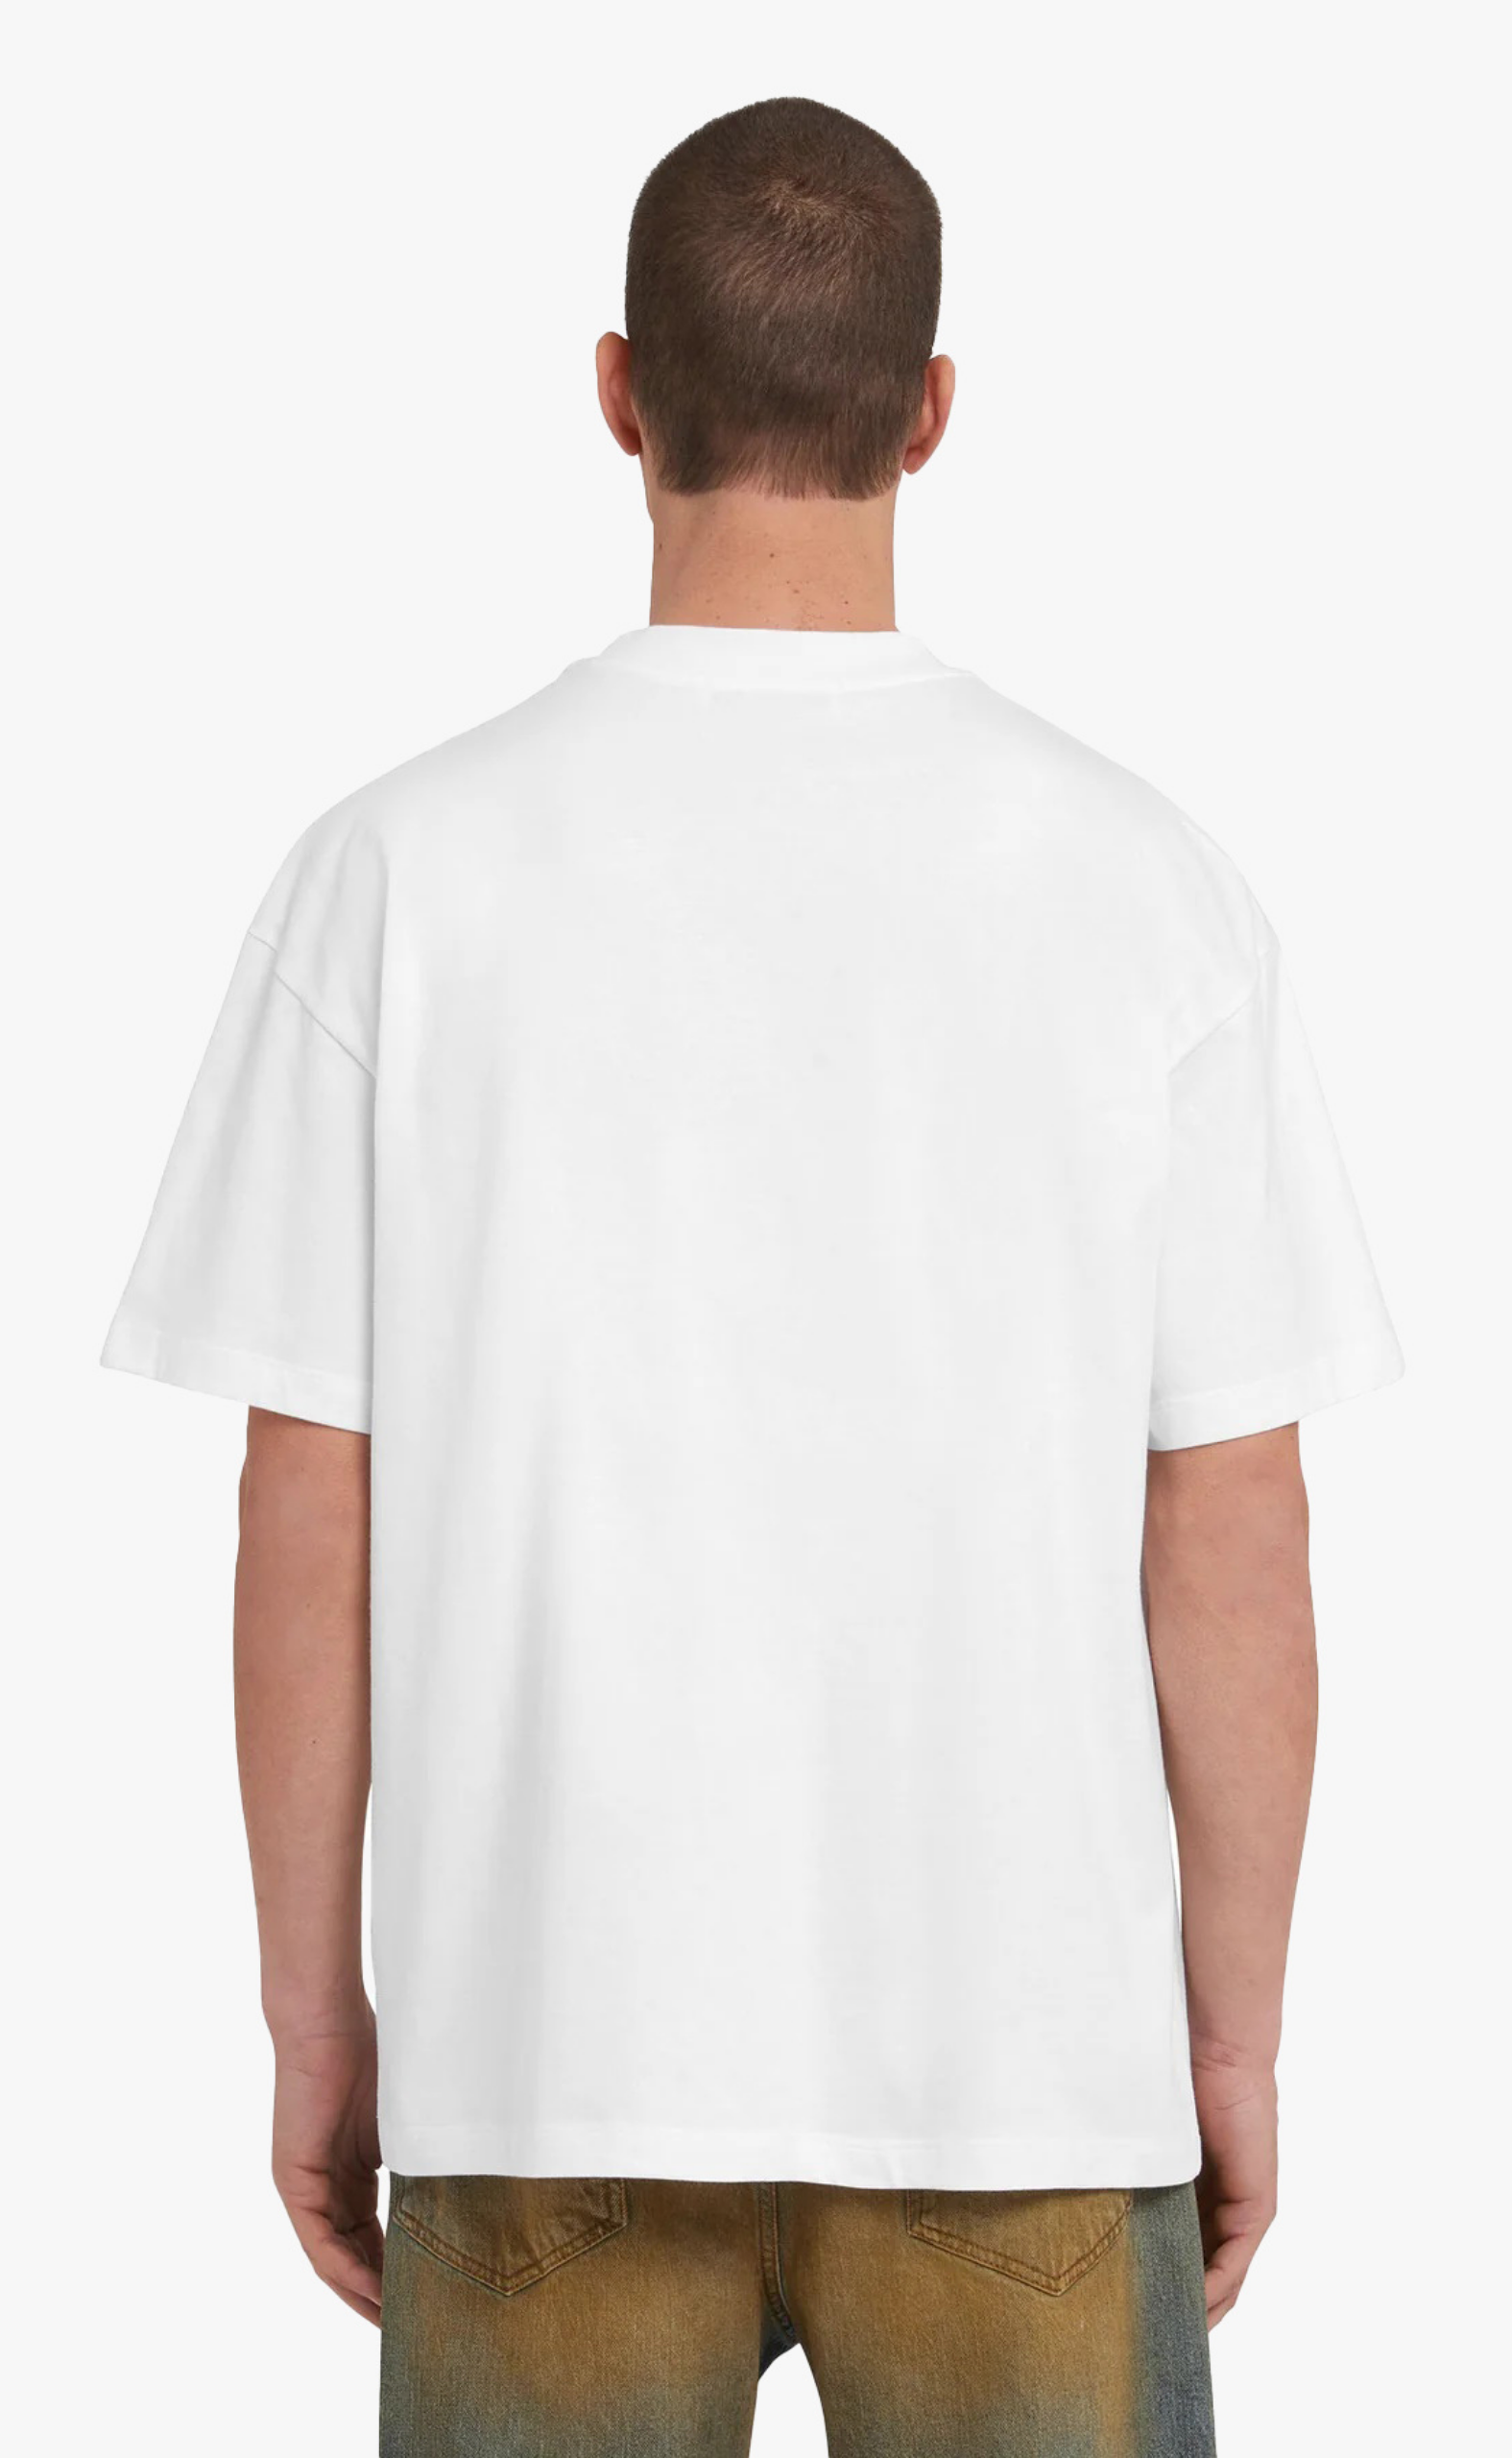 T-SHIRT WITH APPLIED SUNSET PATCH OPTICAL WHITE T-SHIRT